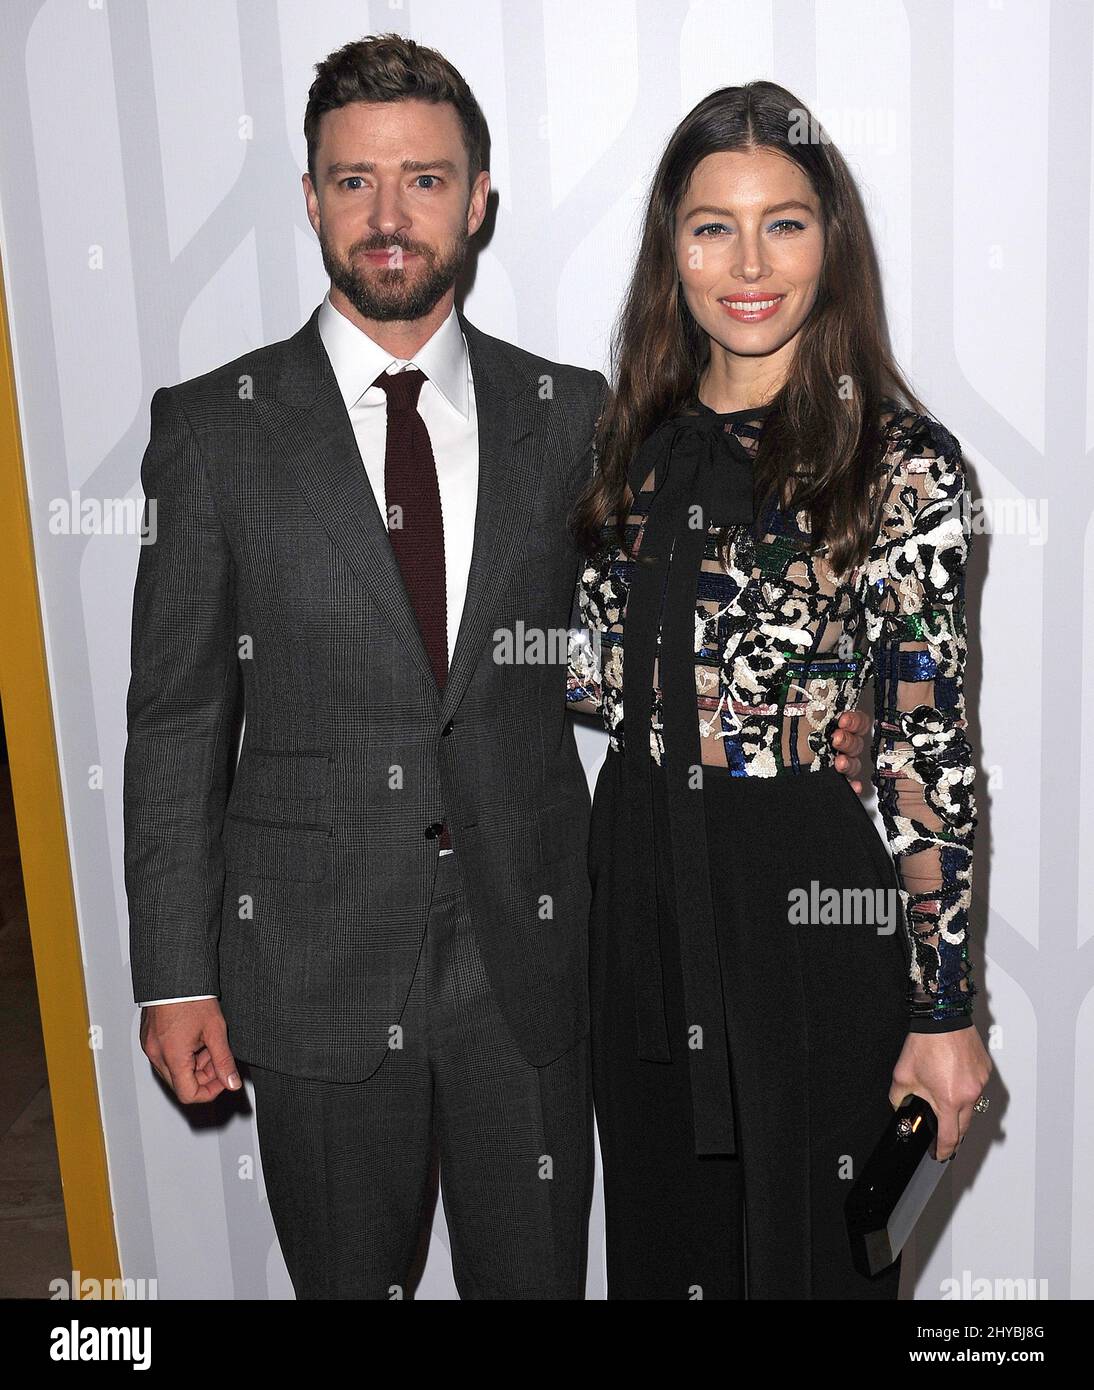 Justin Timberlake, Jessica Biel and Mark Ronson attending the